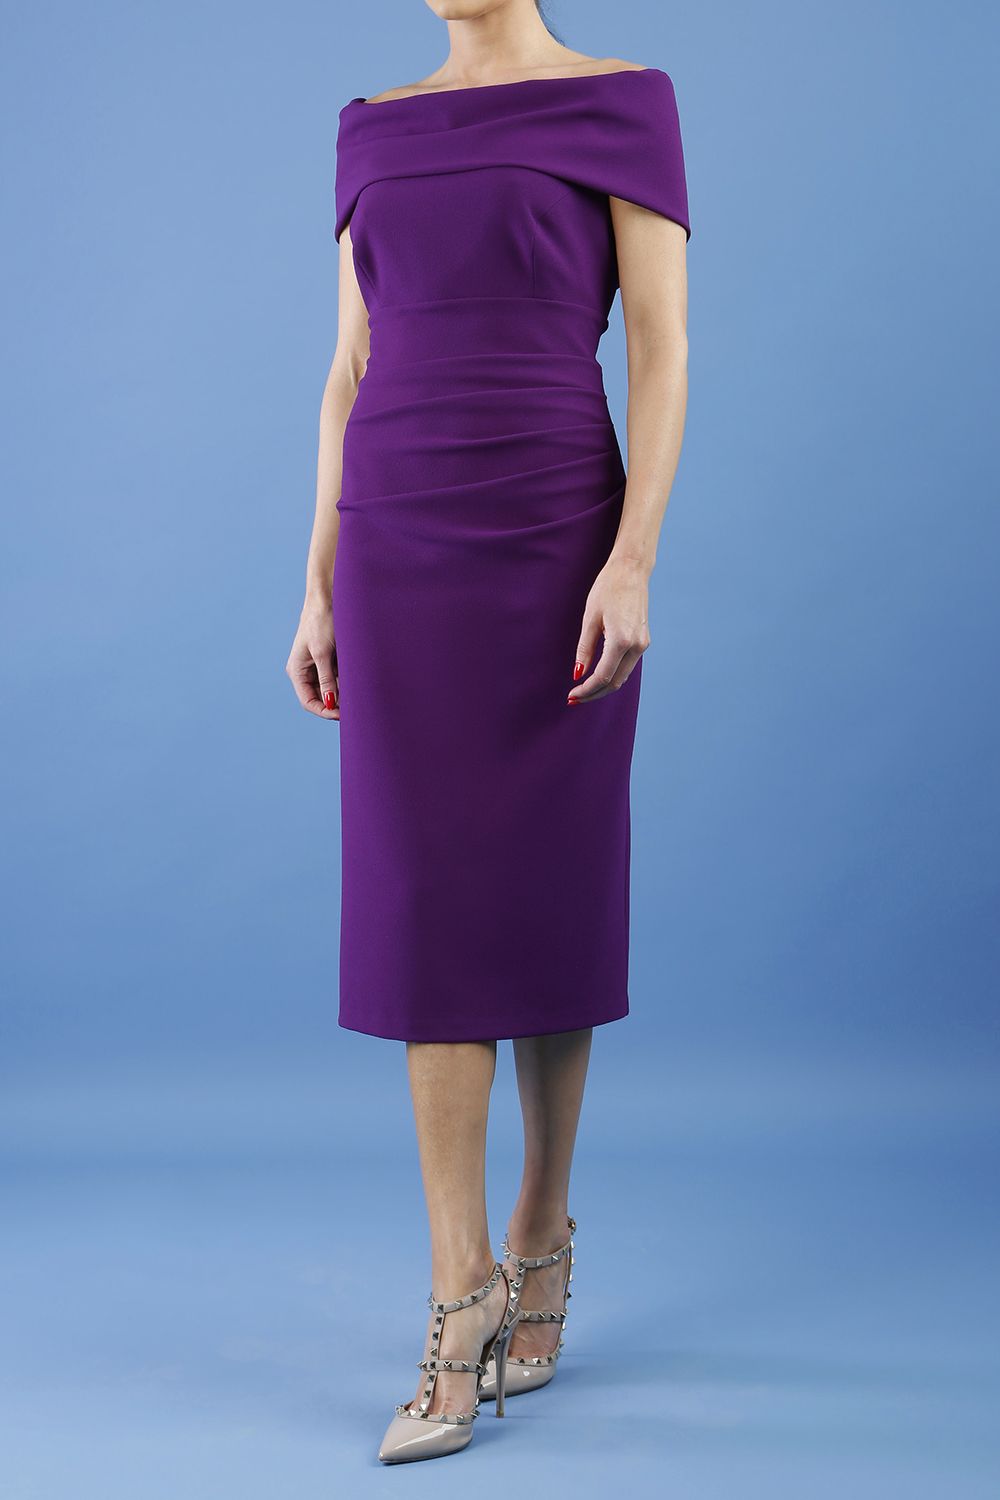 model is wearing diva catwalk amelia pencil dress with bardot neckline and ruched back in passion purple front